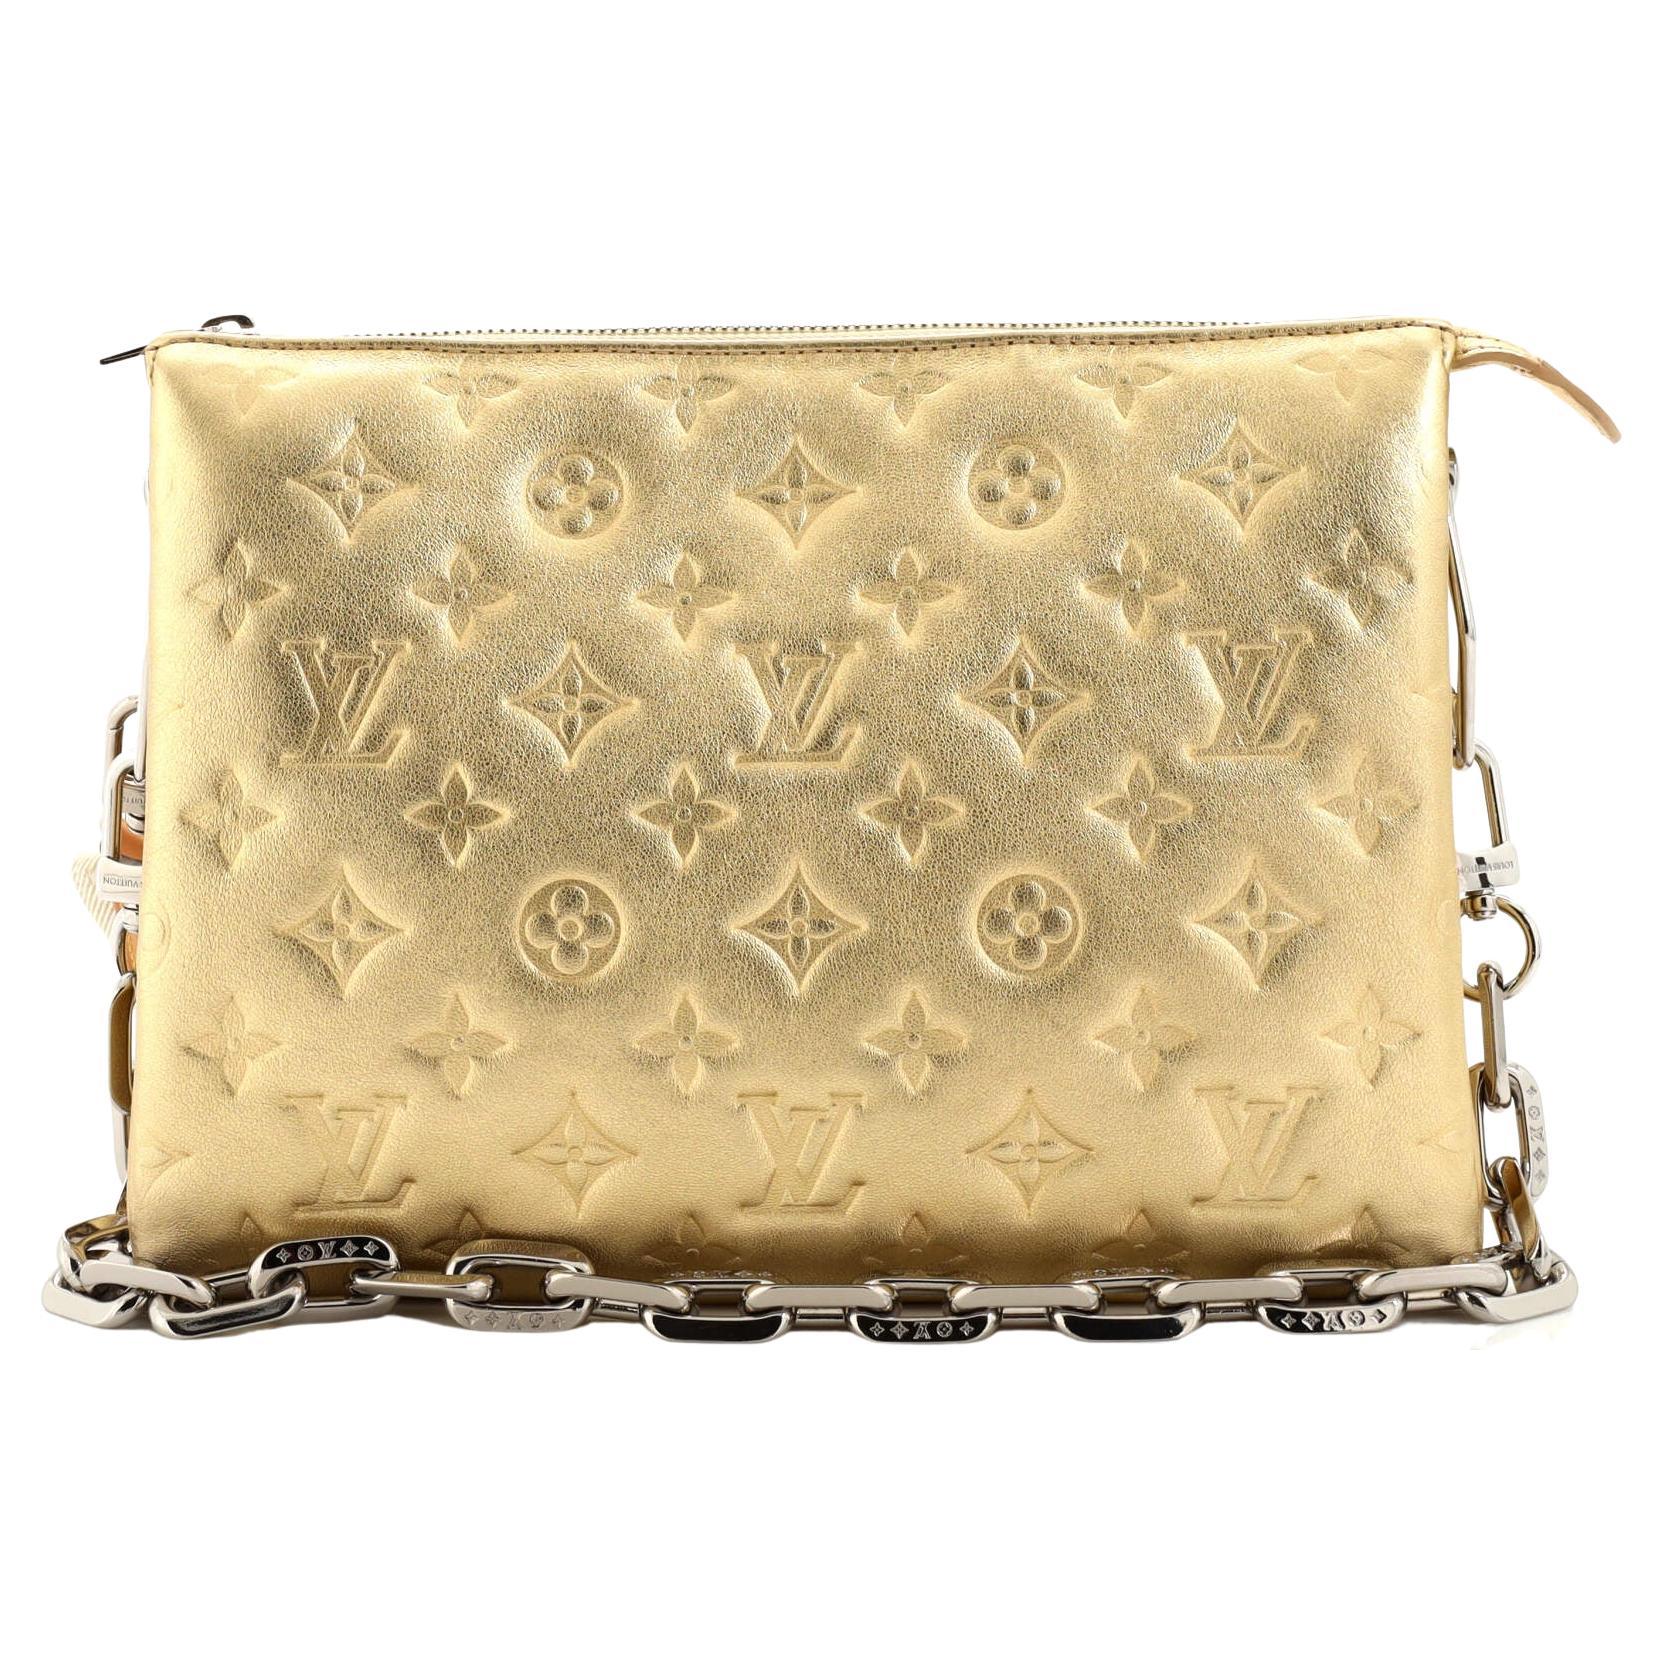 Louis Vuitton Coussin Chain - 2 For Sale on 1stDibs